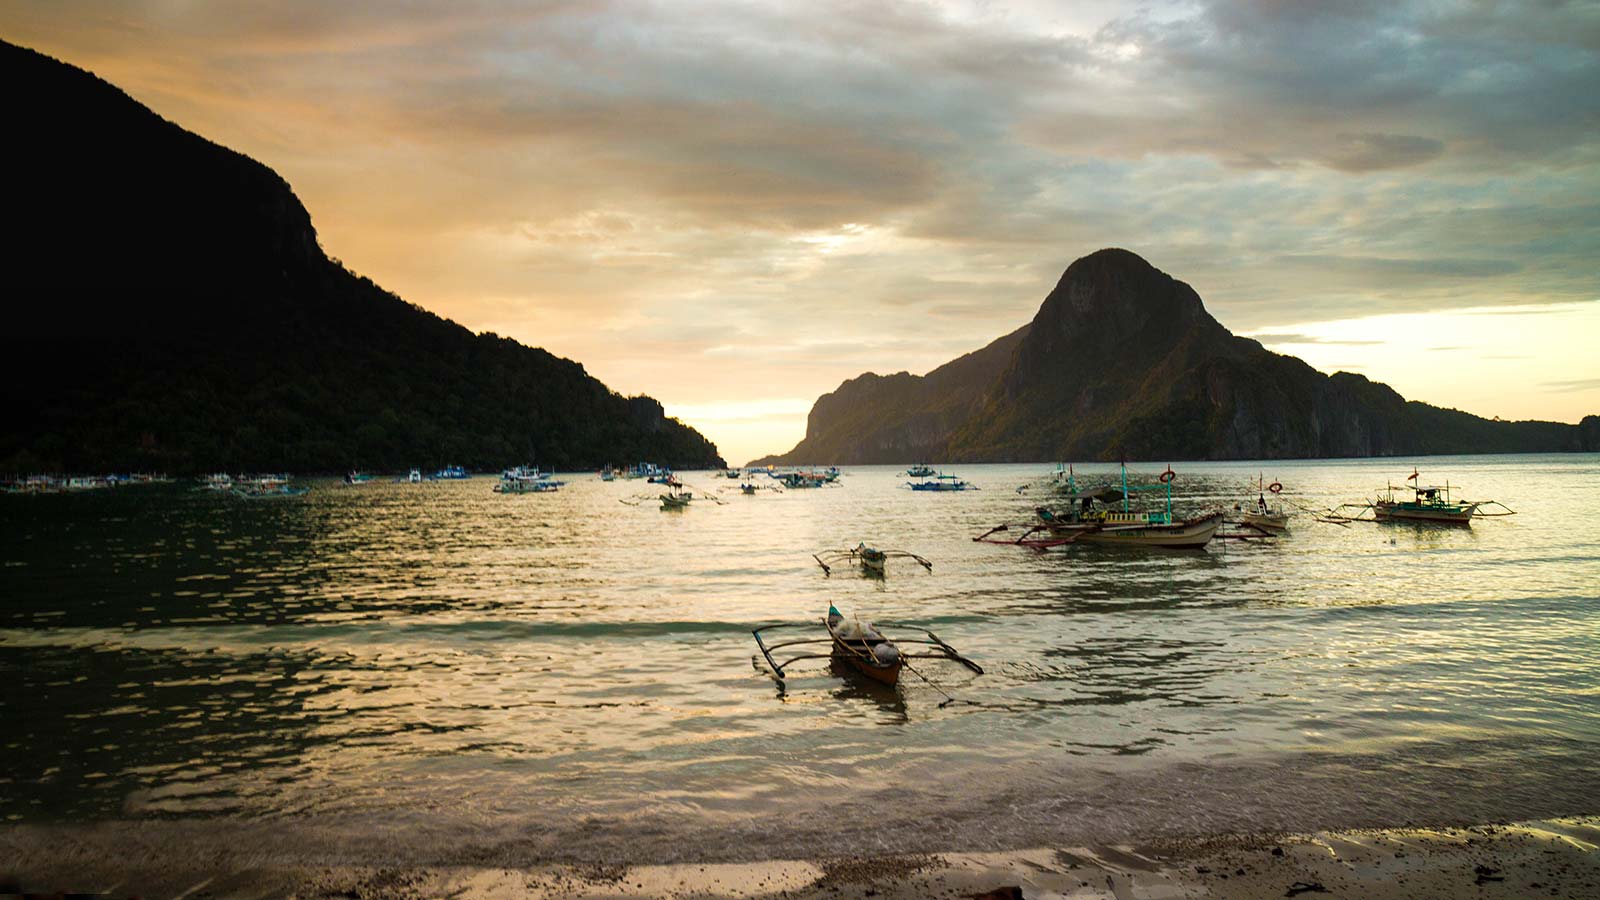 Taking a trip to Palawan? From where to stay, where to eat, and what to see, we have what you need to plan your El Nido family vacation.